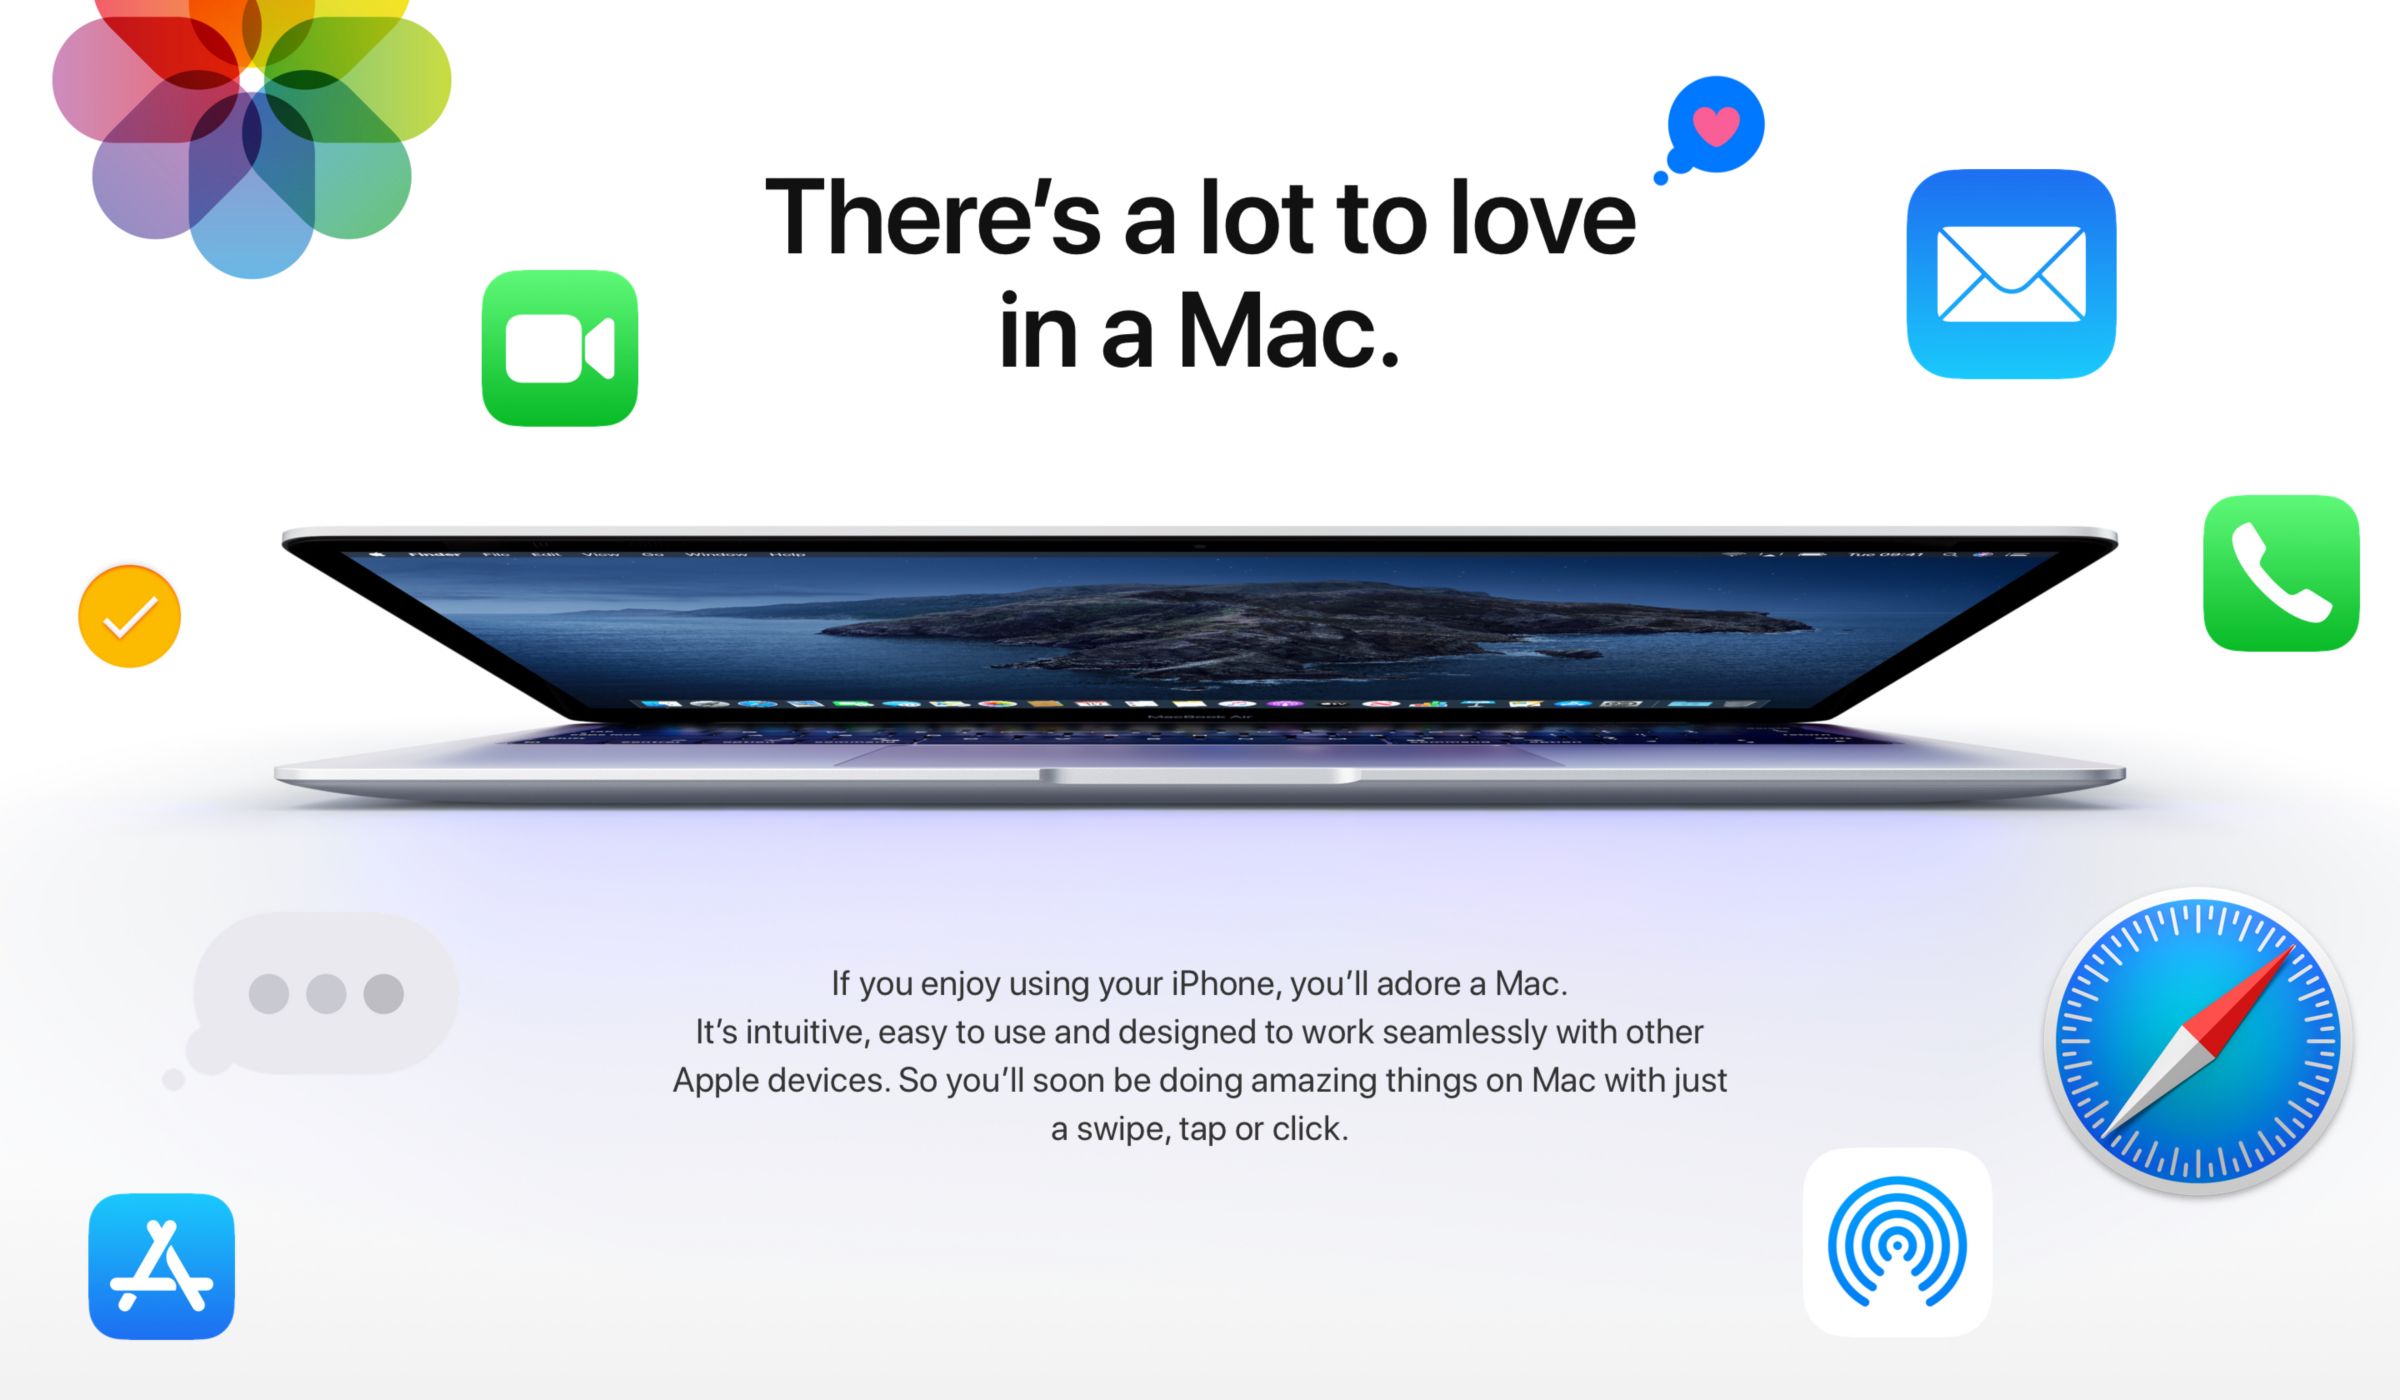 Apple - There is a lot to love in a Mac